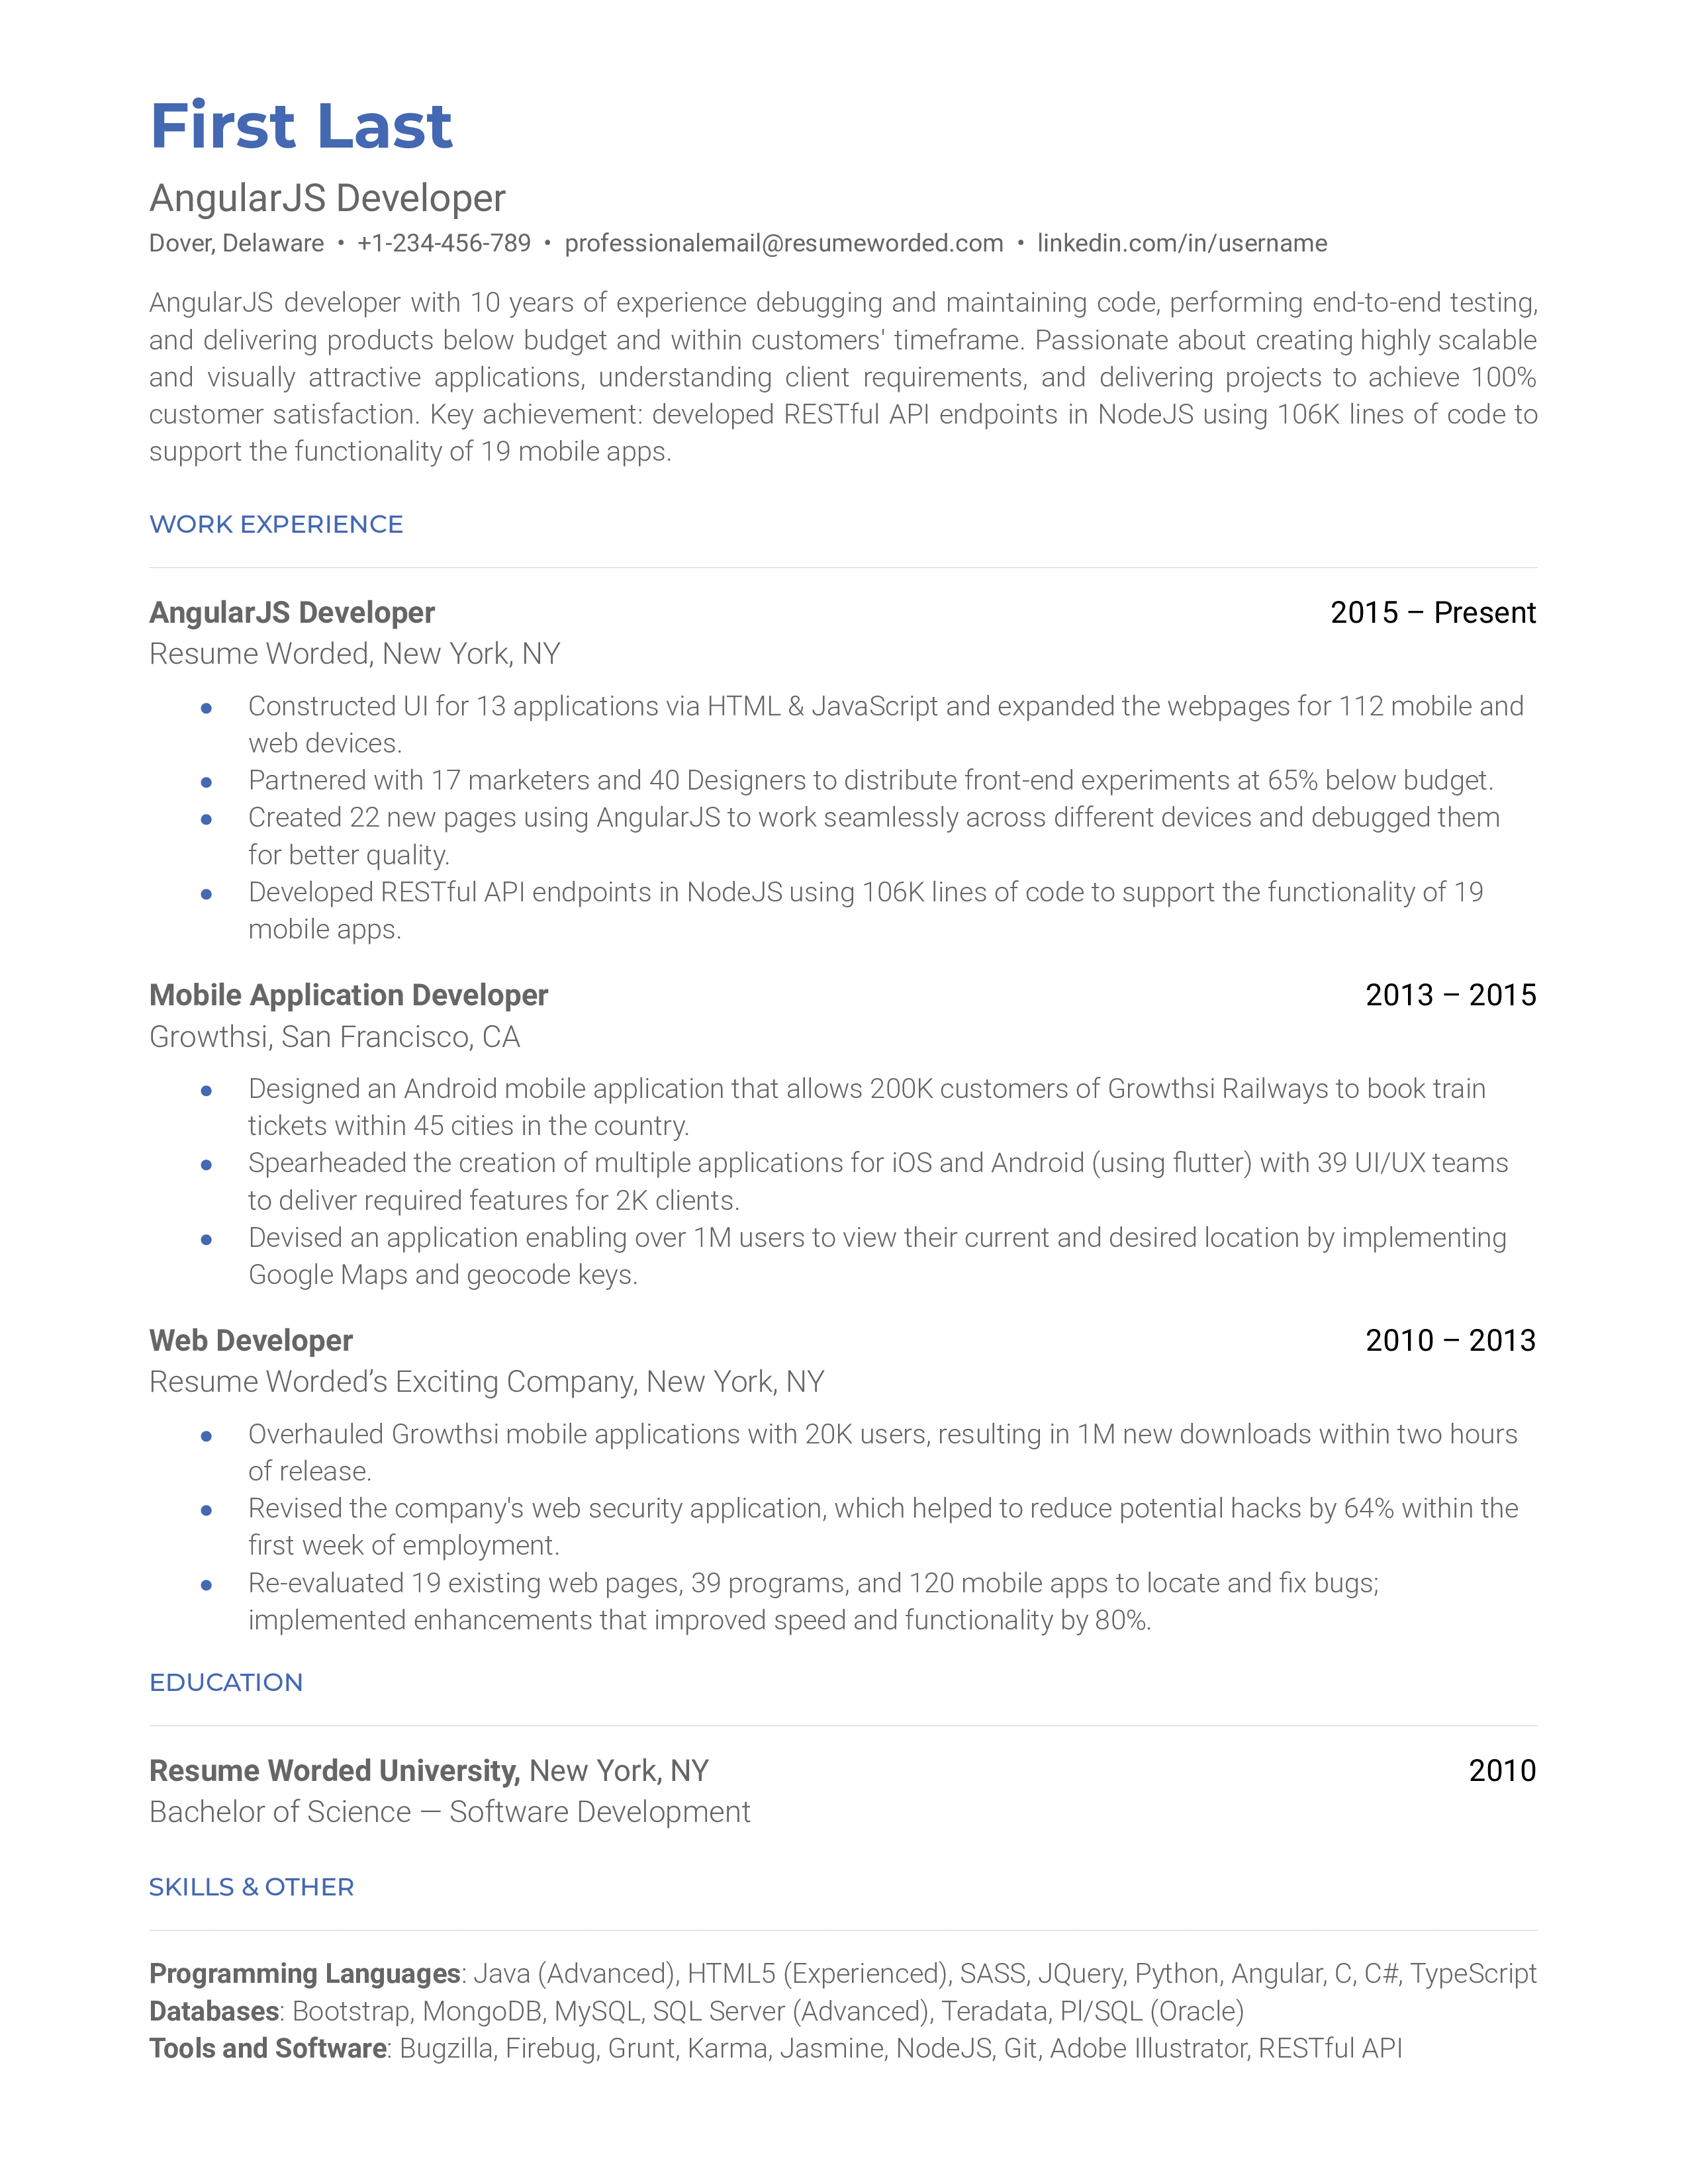 A AngularJS developer resume example including industry-related keywords